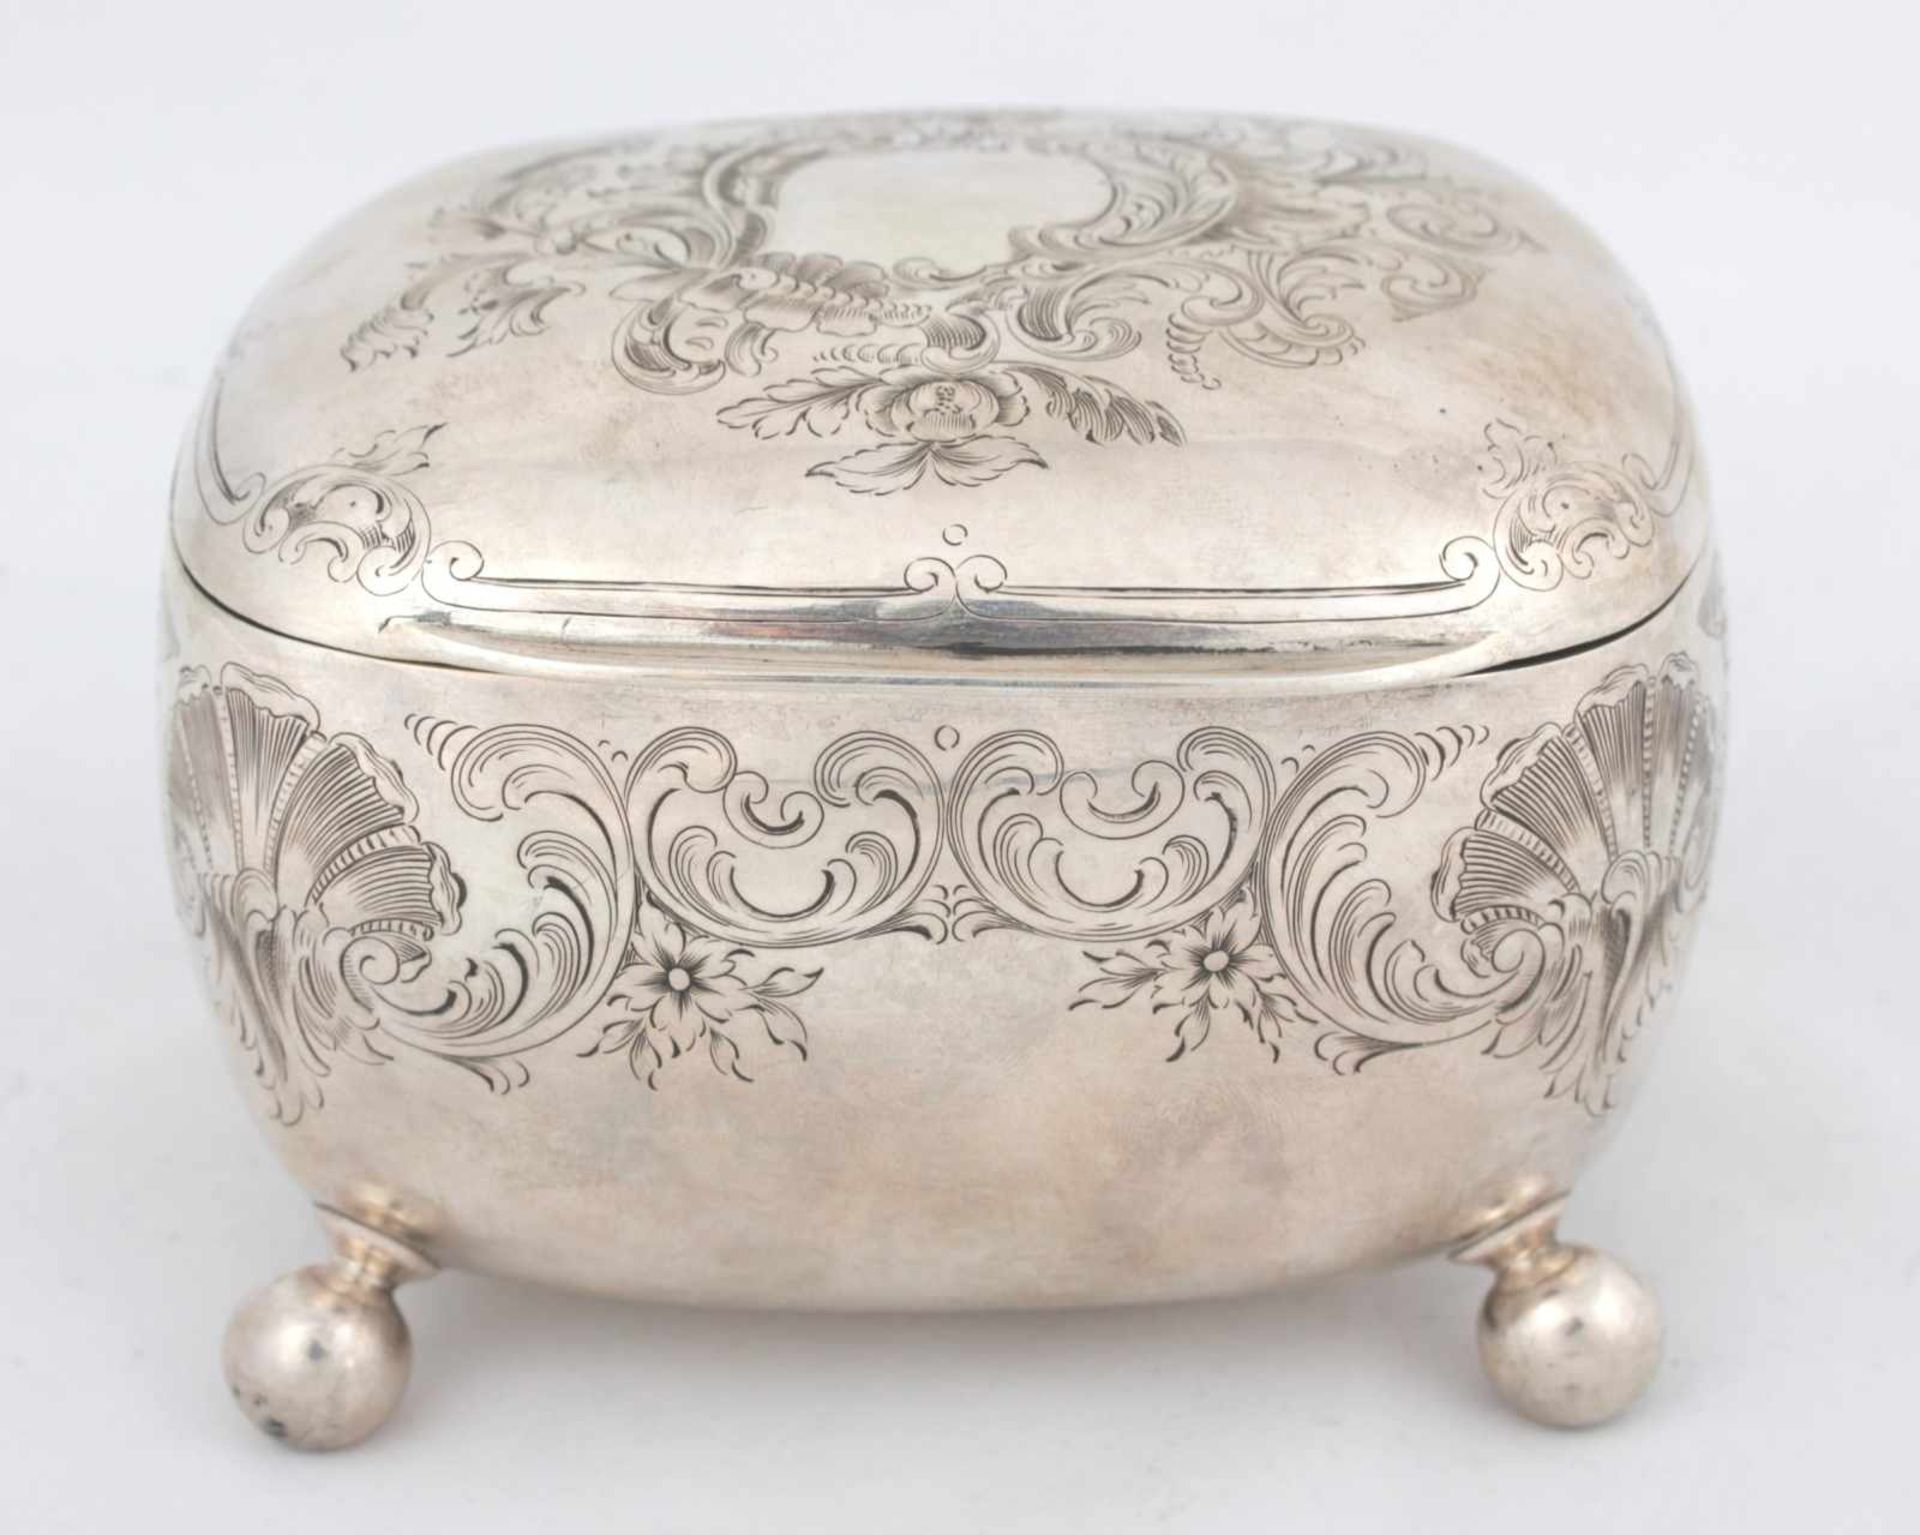 Silver sugar bowl Austria-Hungary, late 19th century silver sugar bowl, decorated with floral